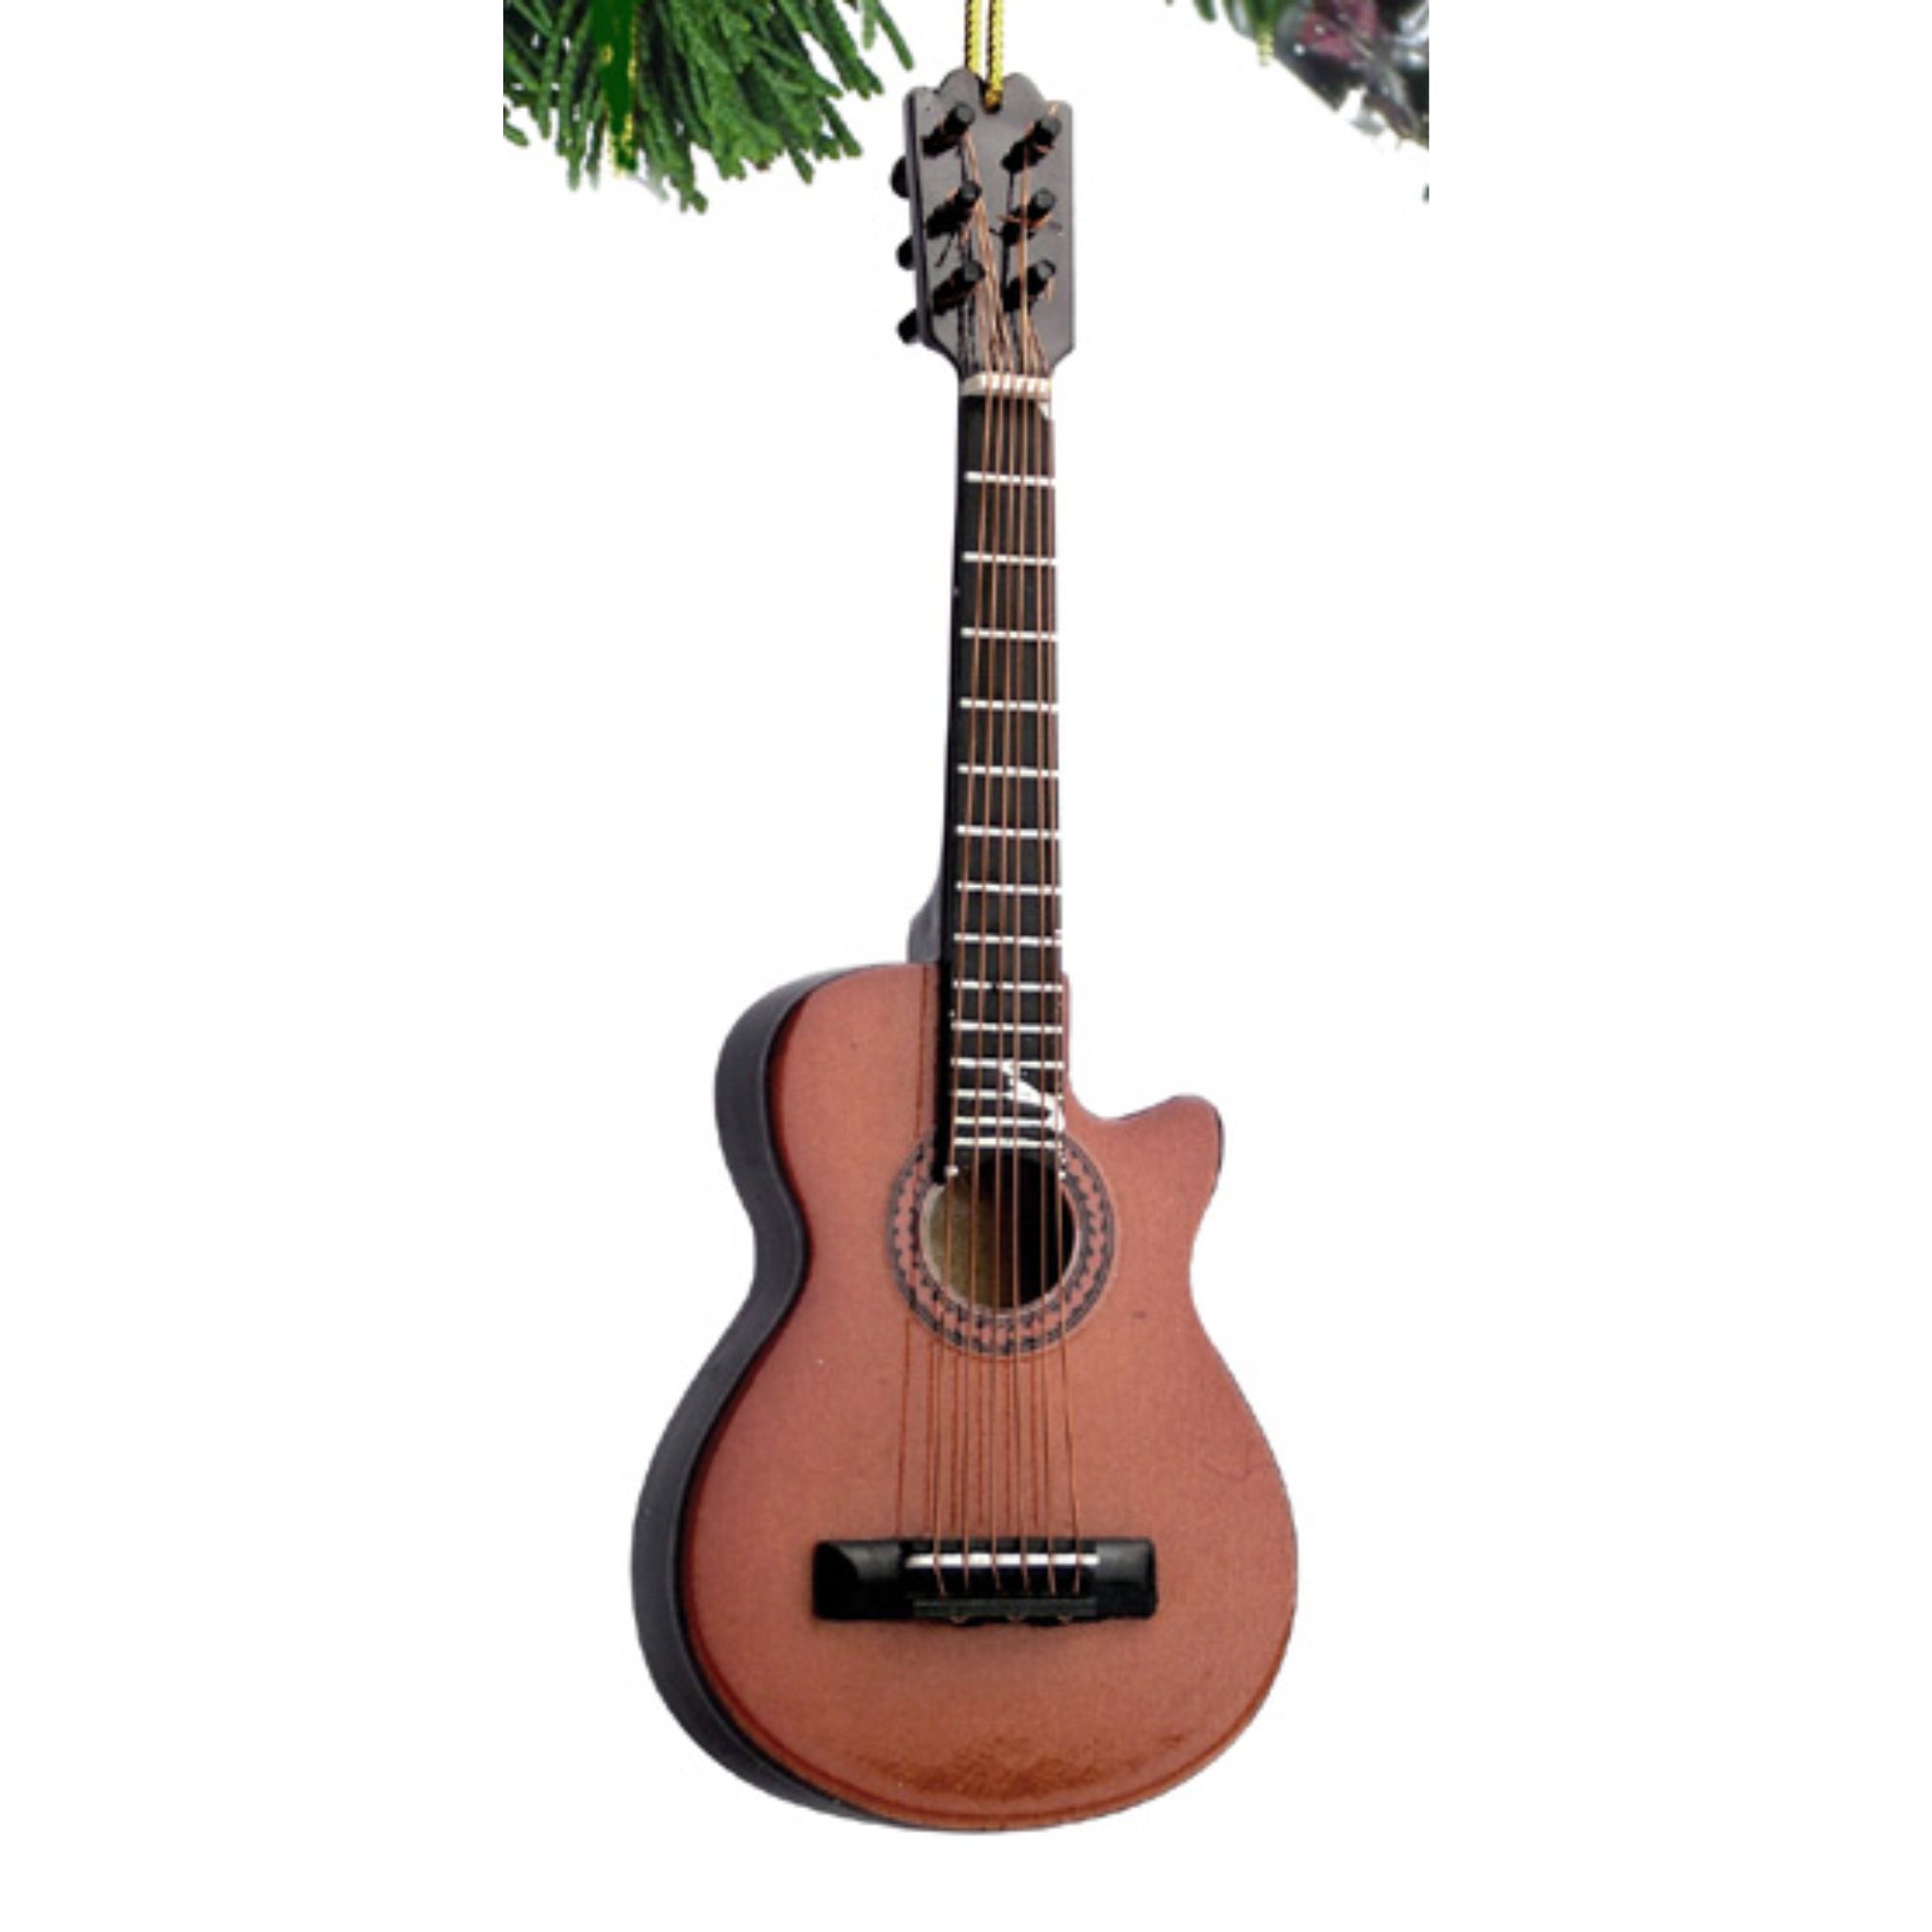 Acoustic Guitar Hand Crafted Wood Christmas Ornament Personalized by RussellRhodes.com